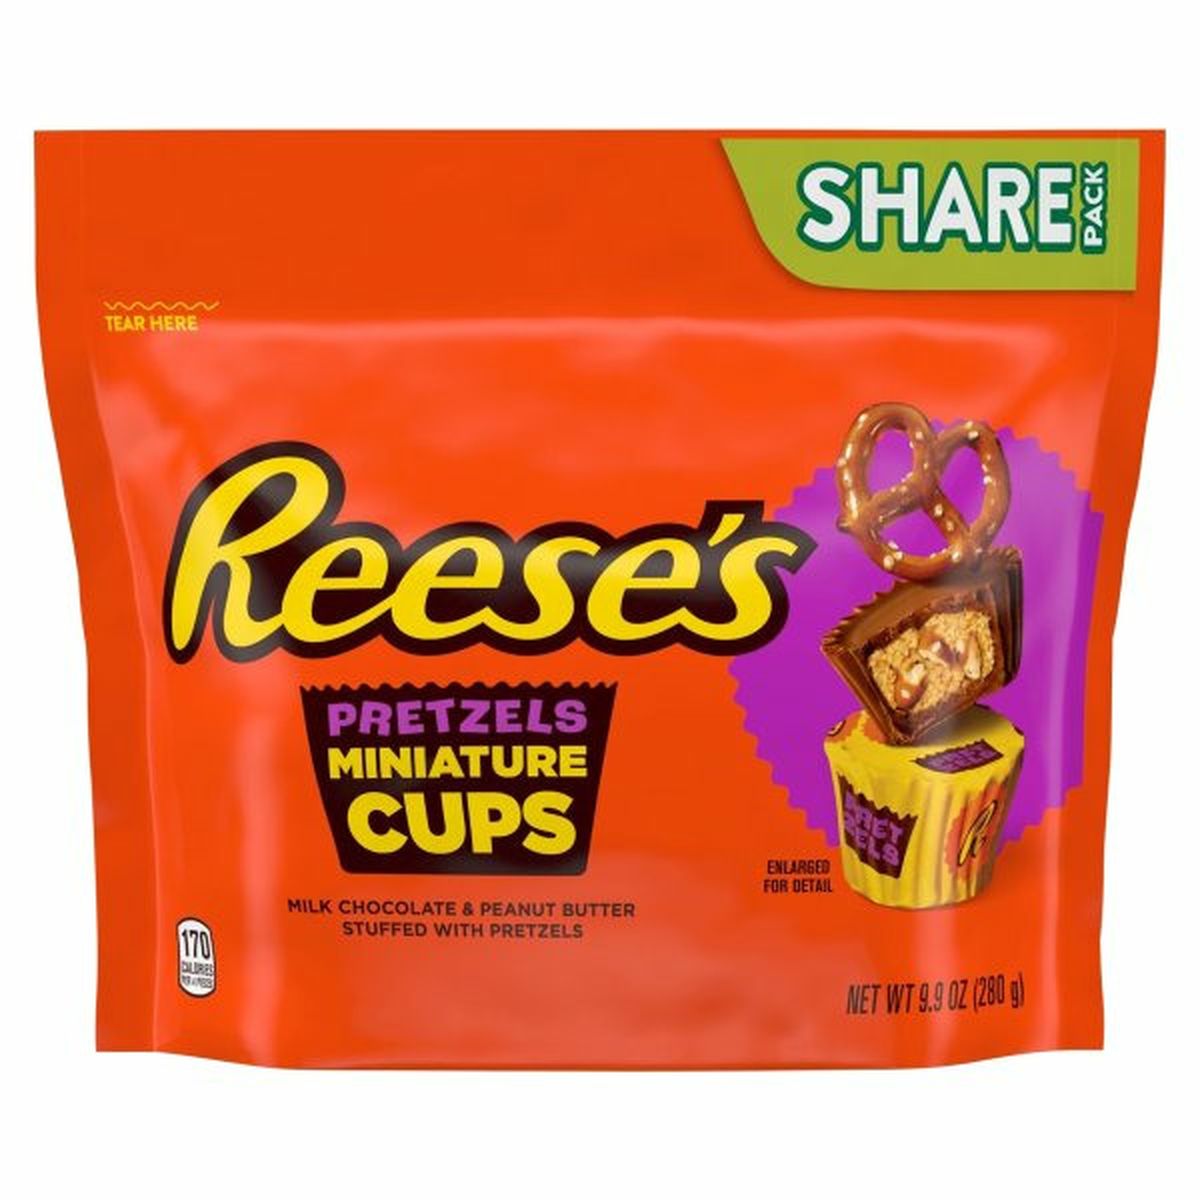 Calories in Reese's Pretzels Miniature Cups, Share Pack